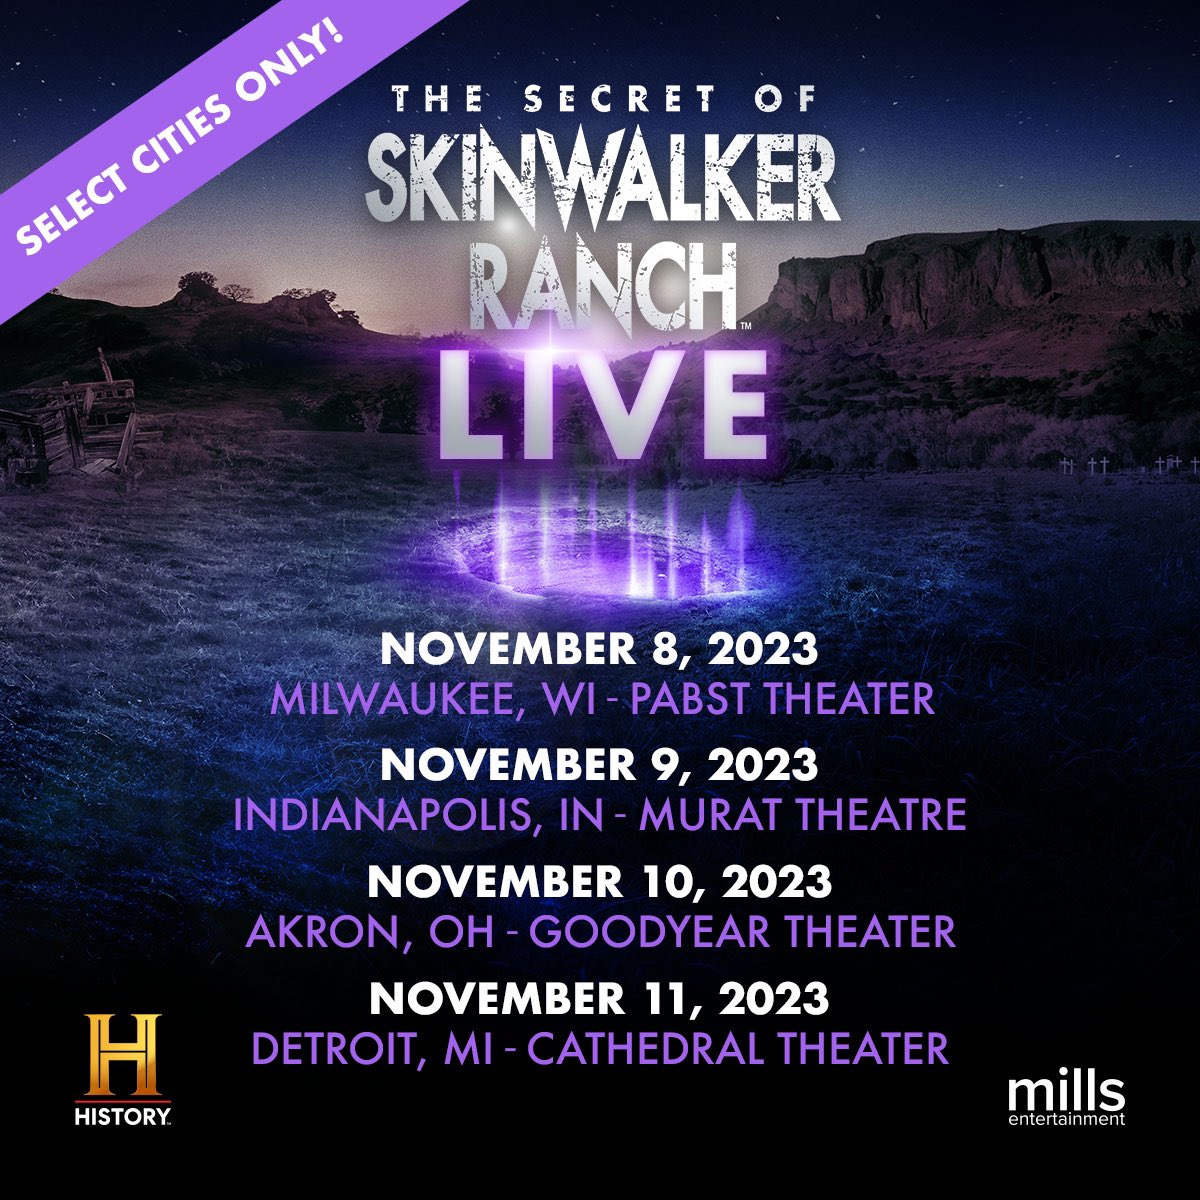 What are you waiting for? This is the only time you’ll get to see the tour live. Don’t wait! thesecretofskinwalkerranchlive.com